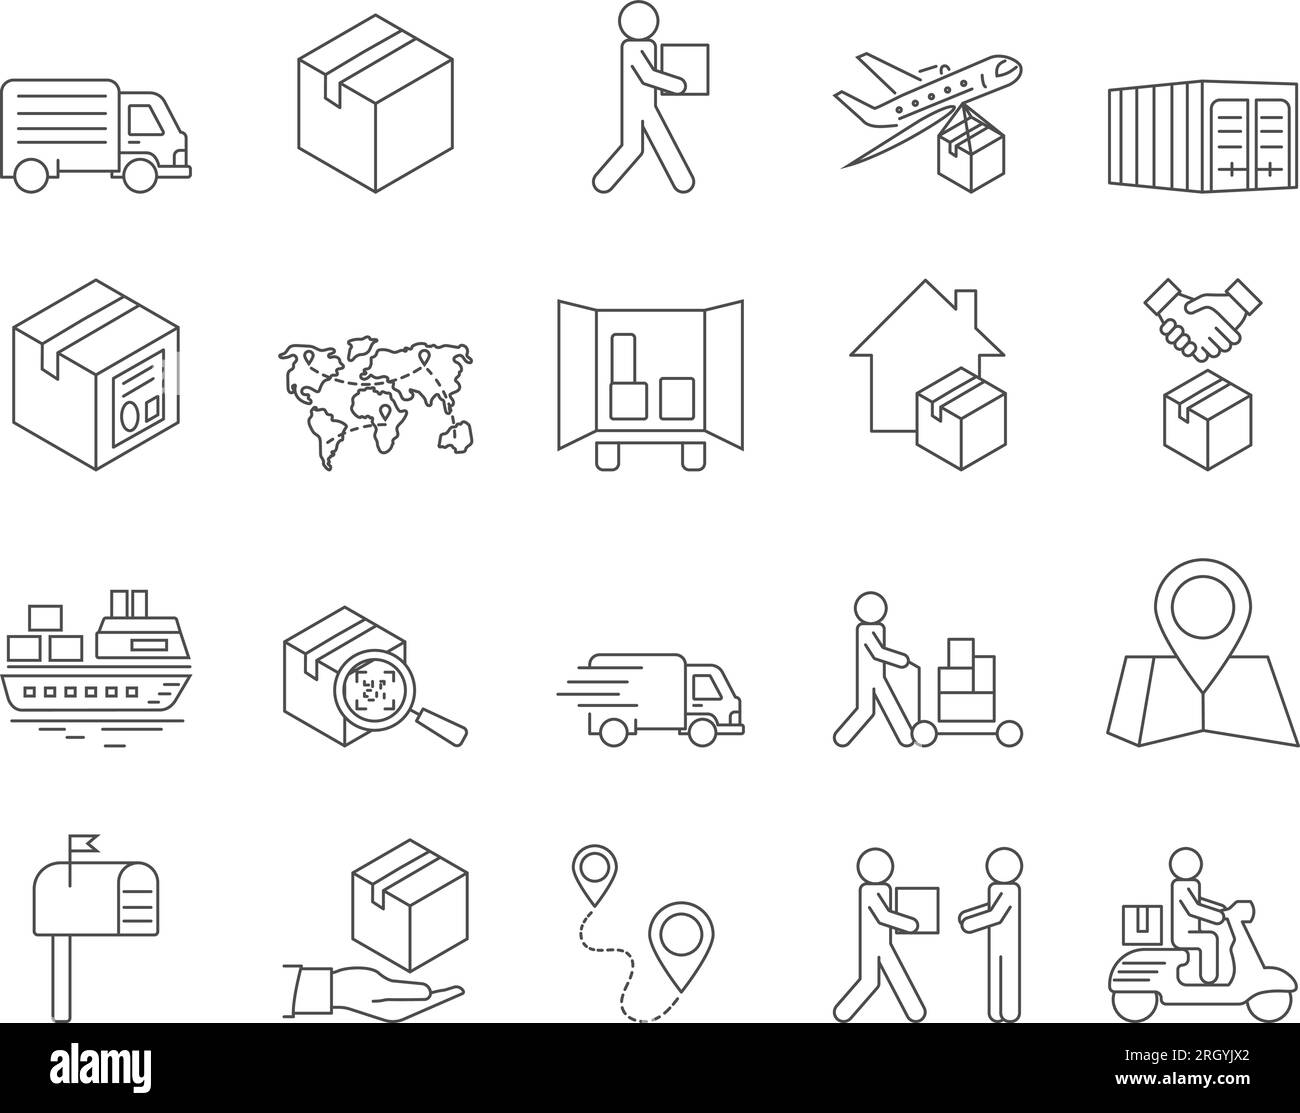 Shipping and Delivery Icons Set. Cargo, Logistics, Parcel. Editable Stroke. Simple Icons Vector Collection Stock Vector